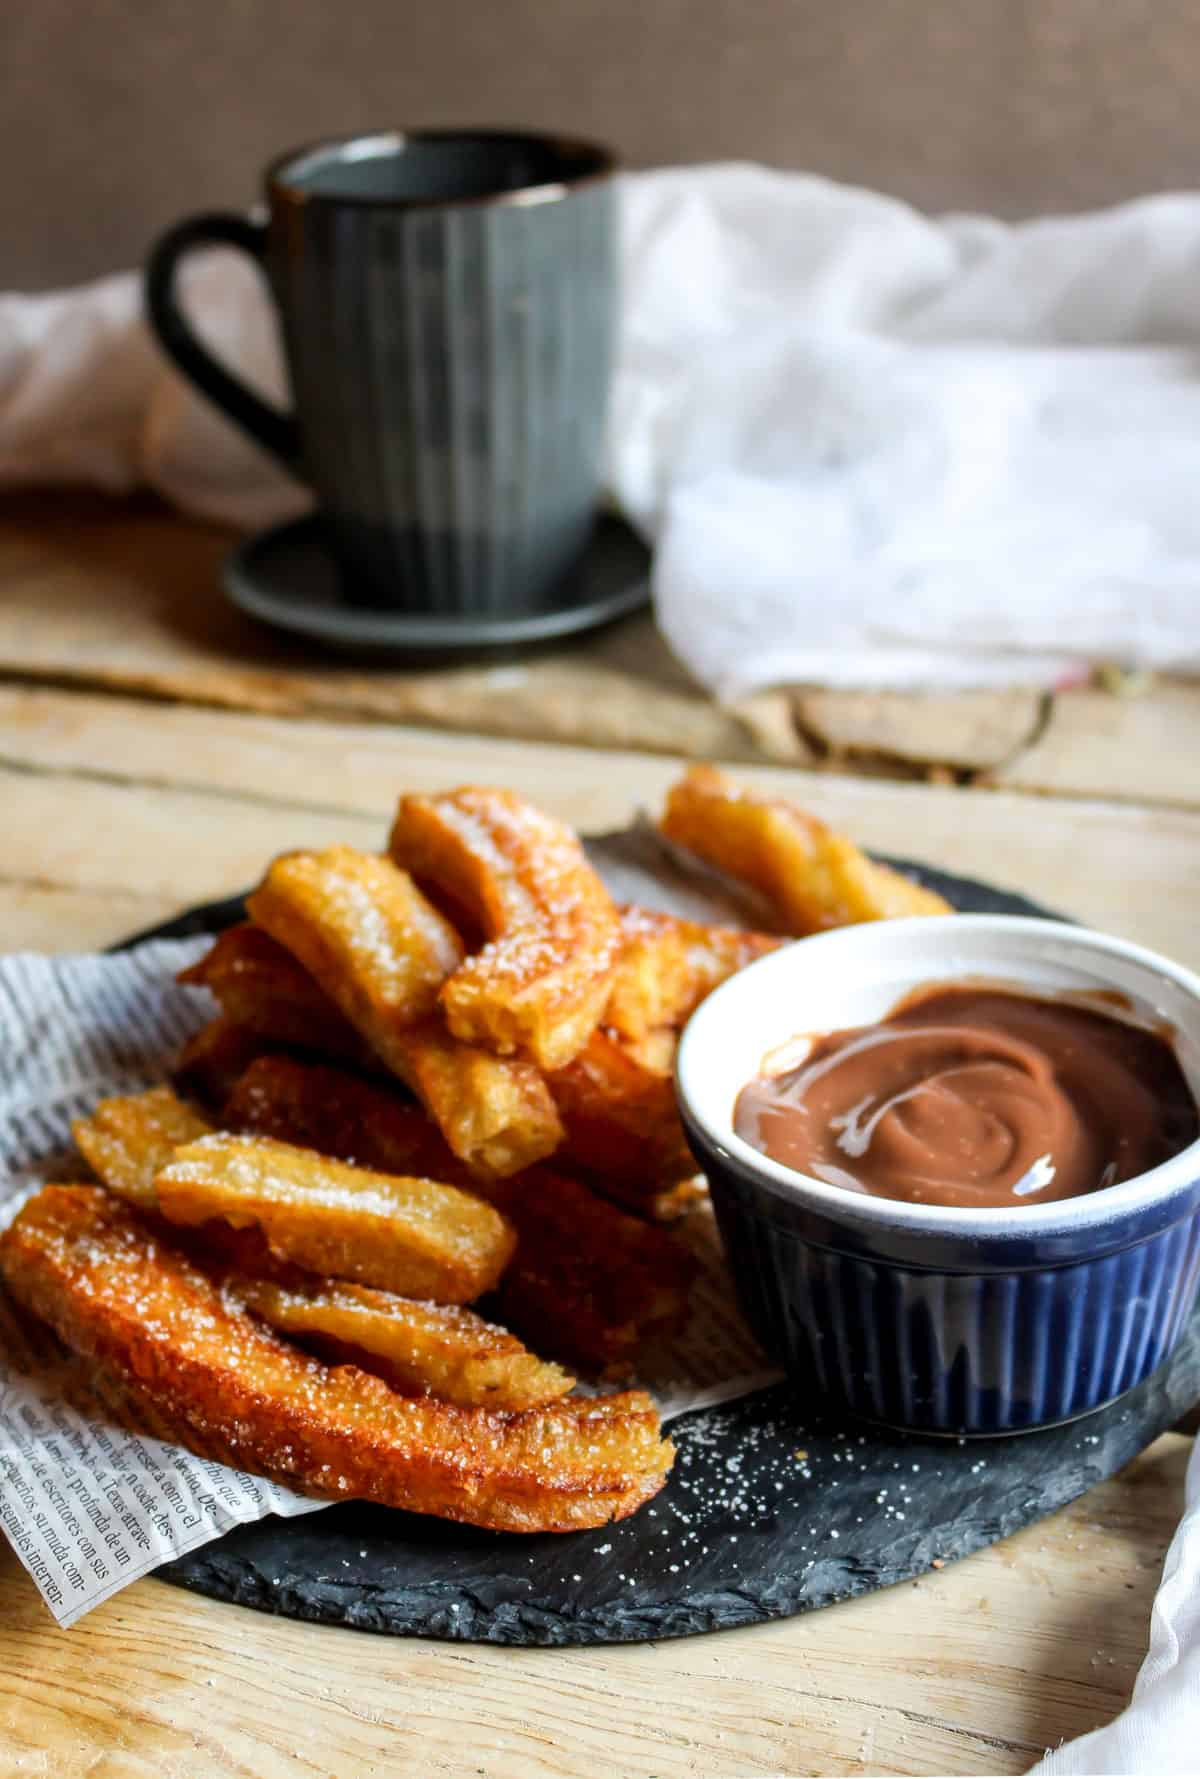 Table with a plate of churros and chocolate sauce, with a mug in the background.